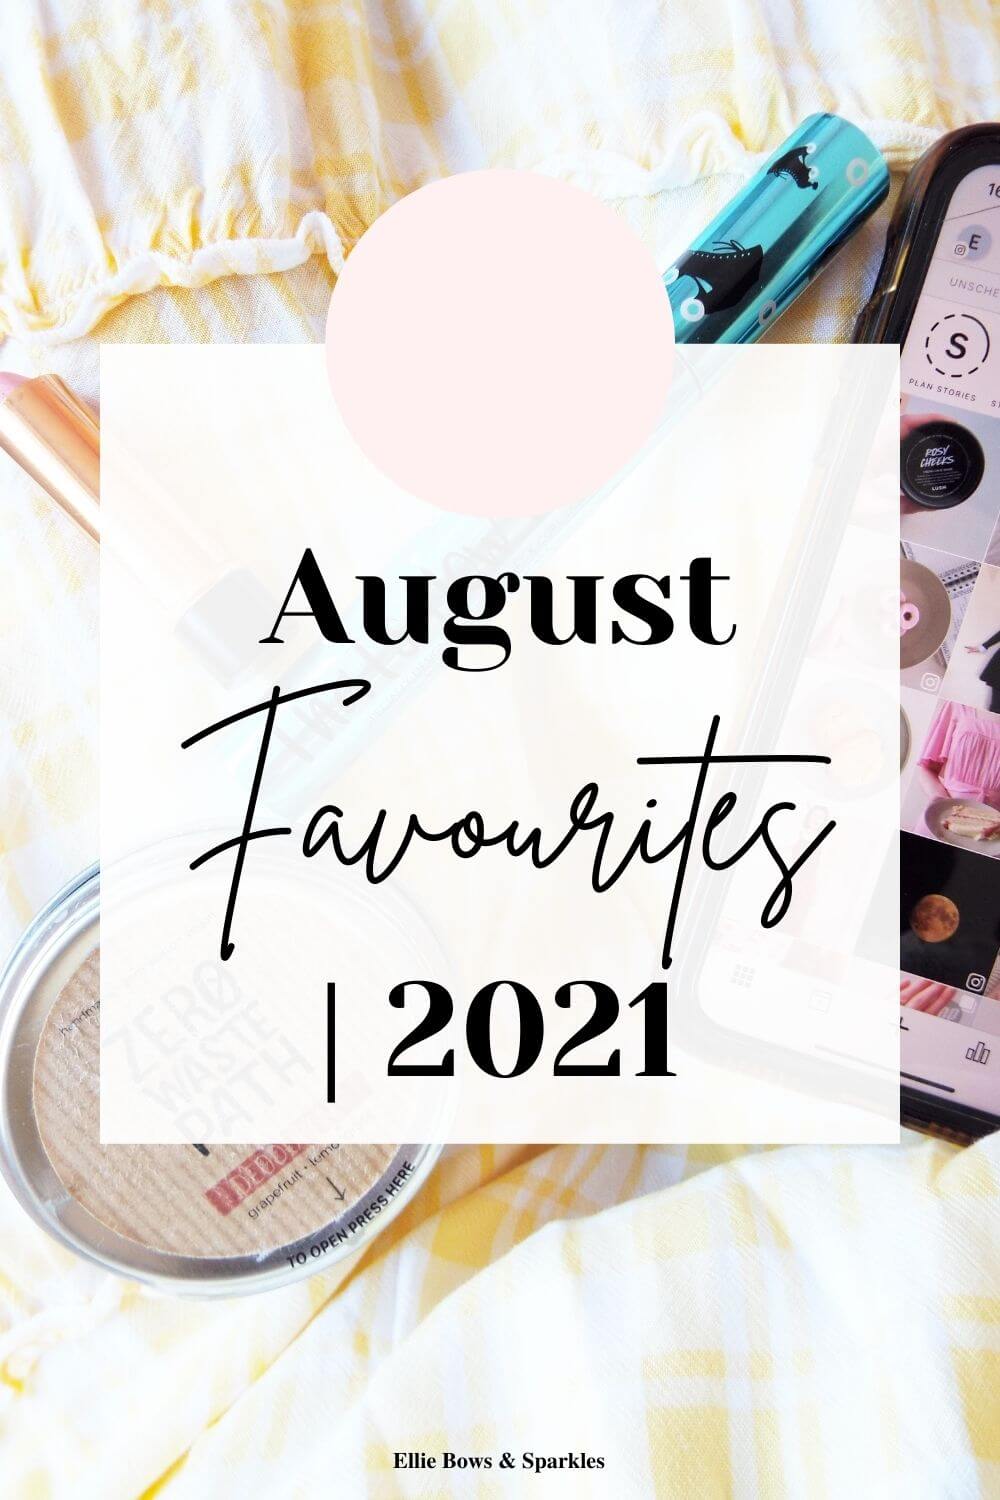 Pinterest pin with yellow gingham dress flatlay, displaying some of my August favourites, with a translucent white title card, with bold and handwritten text reading "August Favourites 2021".